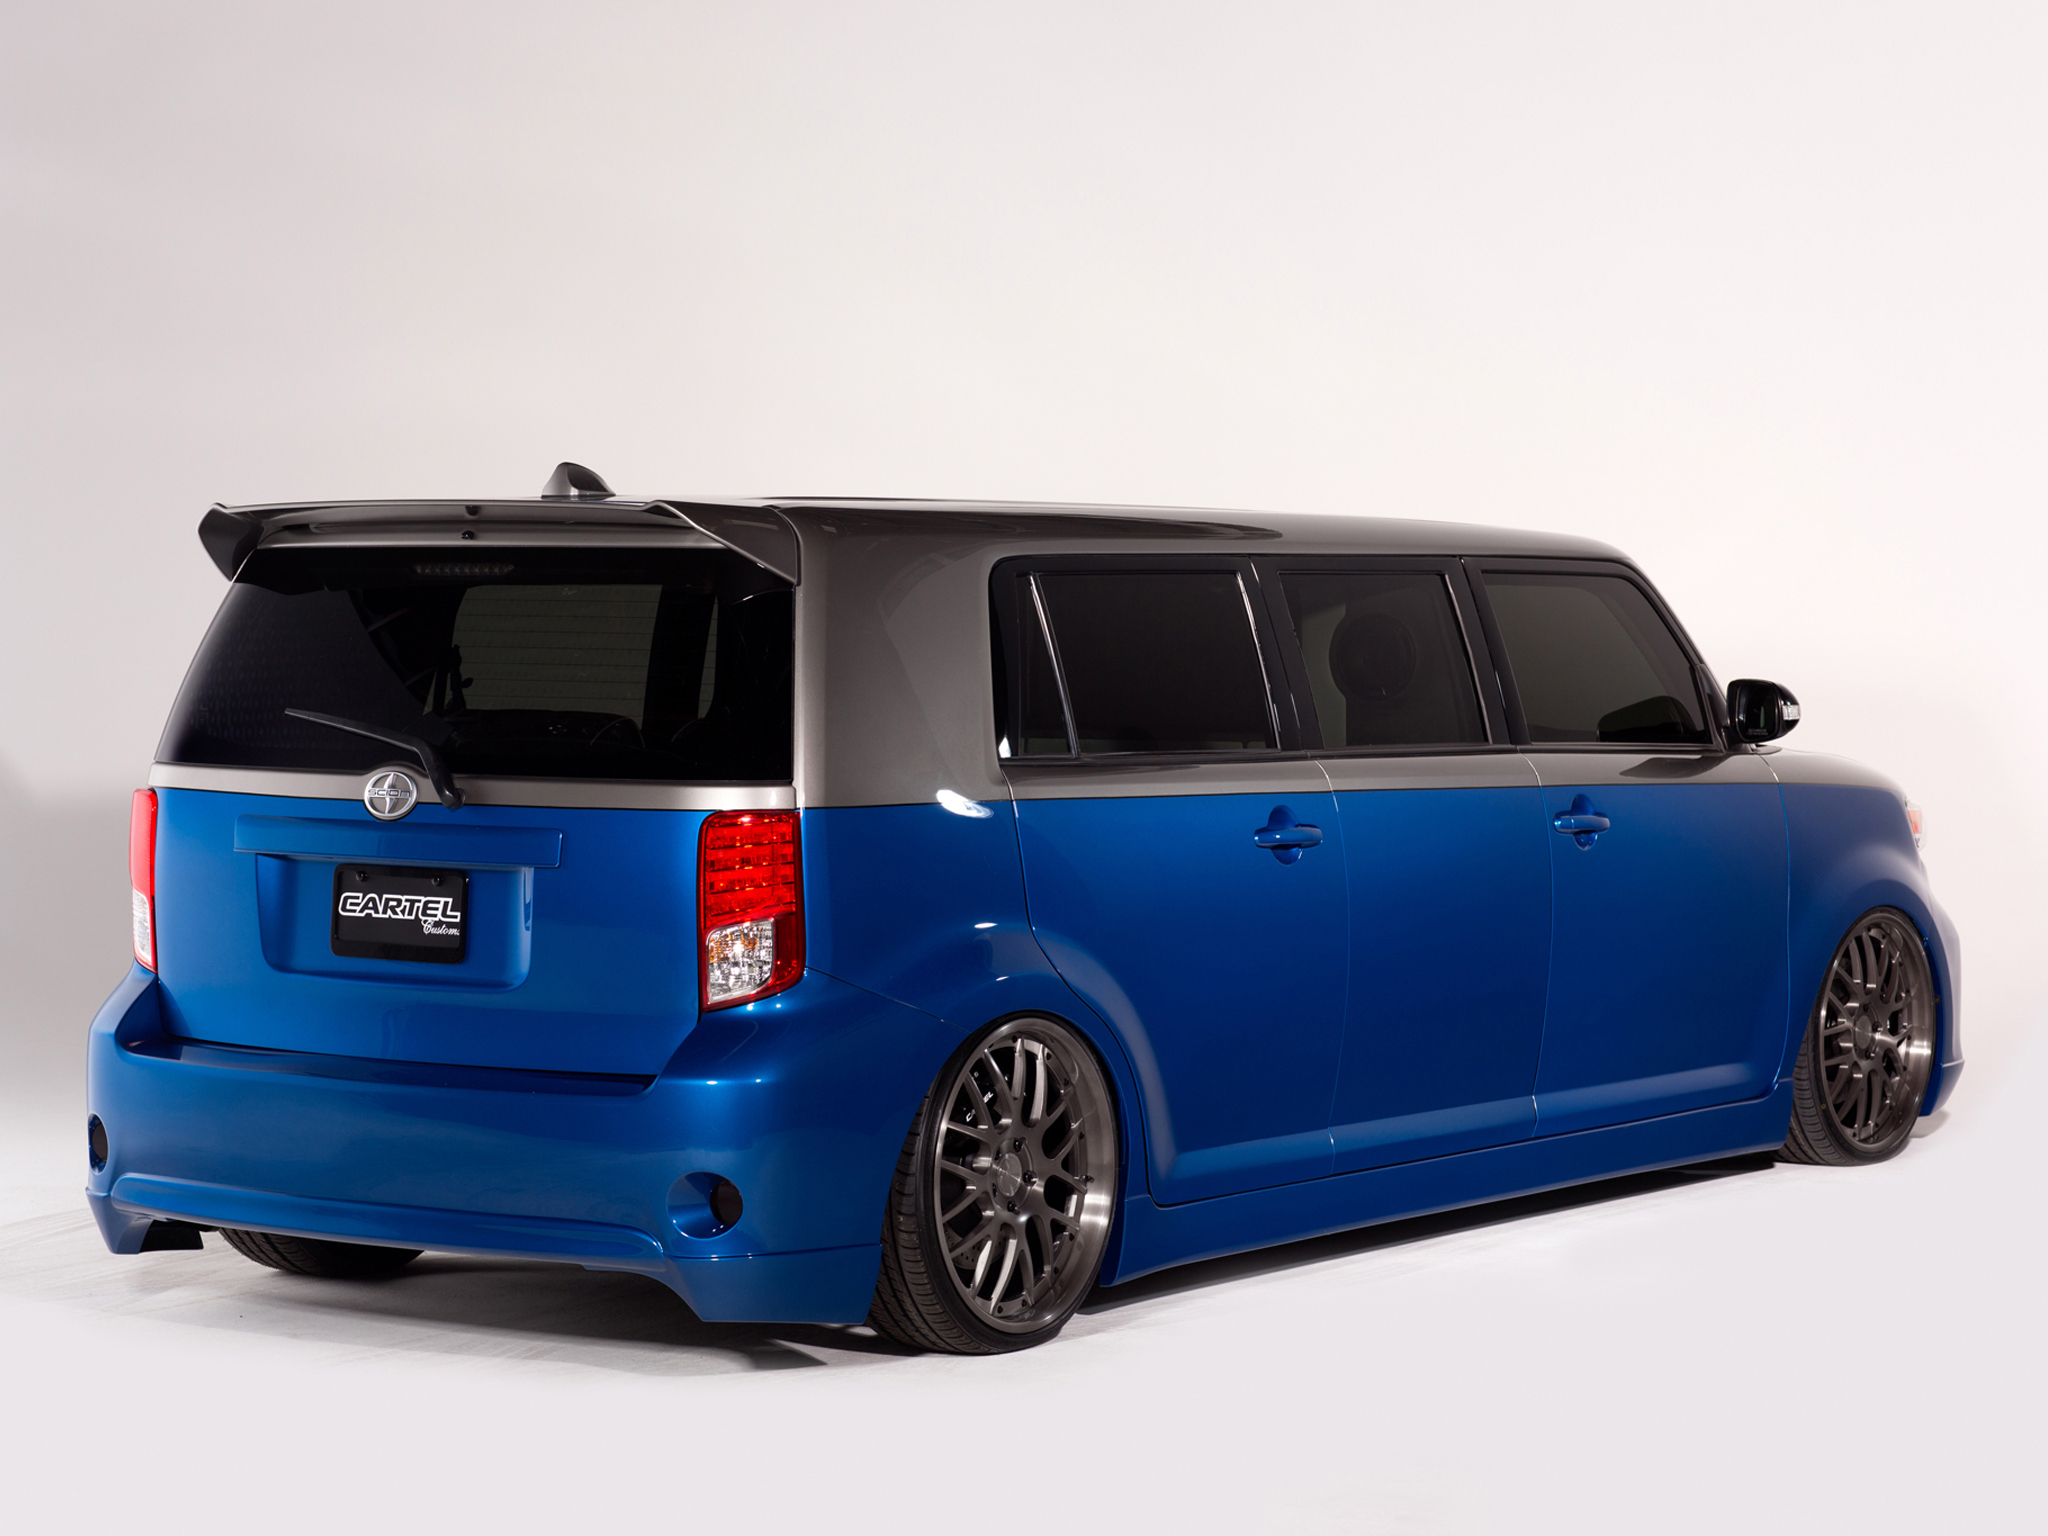 2014, Scion, Xb, Strictly, Business, Cartel, Limousine, Tuning, Suv  Wallpapers HD / Desktop and Mobile Backgrounds